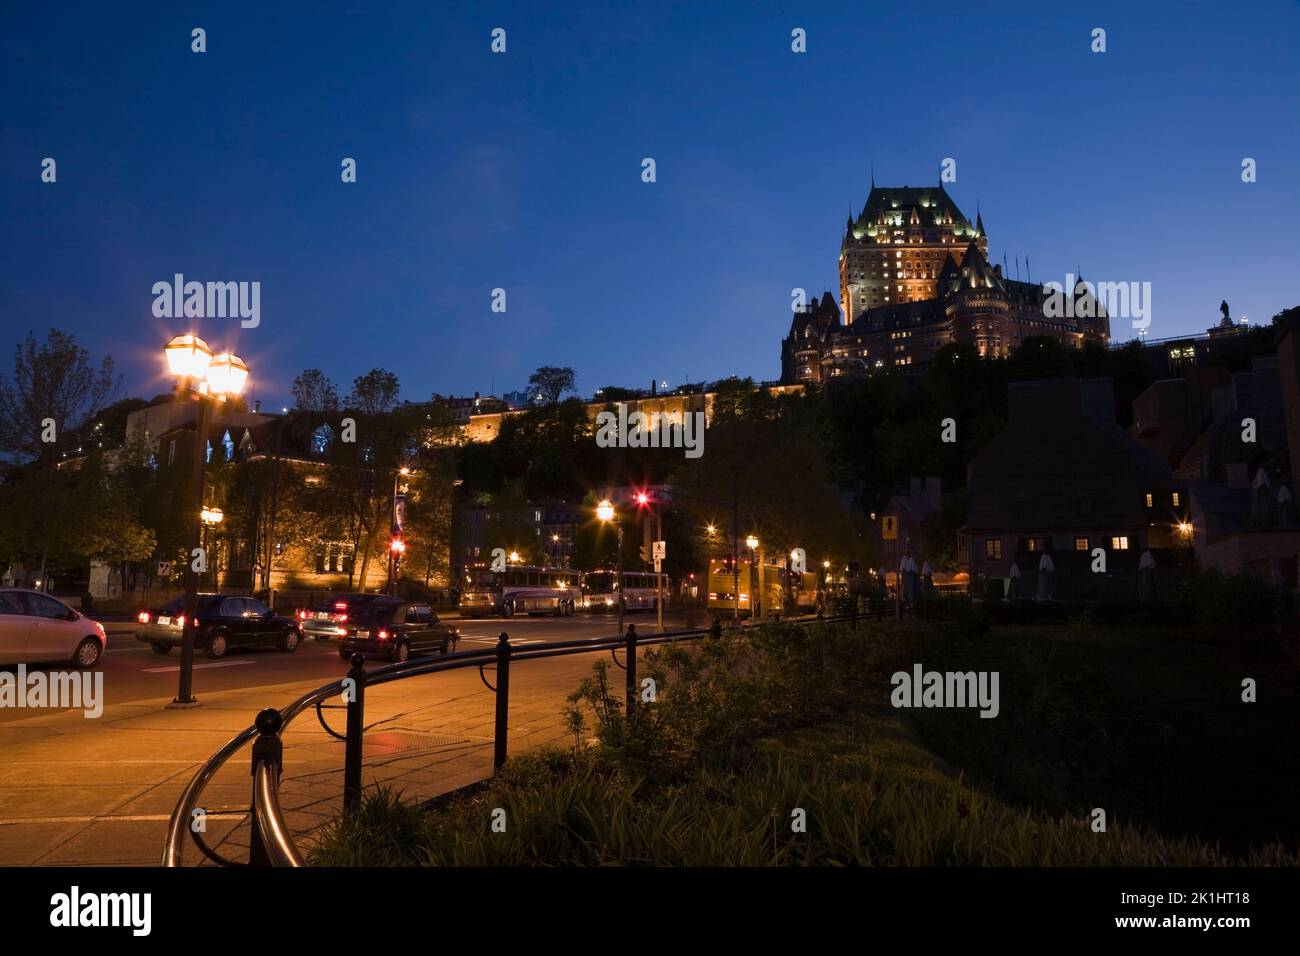 Champlain boulevard and Chateau Frontenac at night, Quebec City, Quebec, Canada Stock Photo